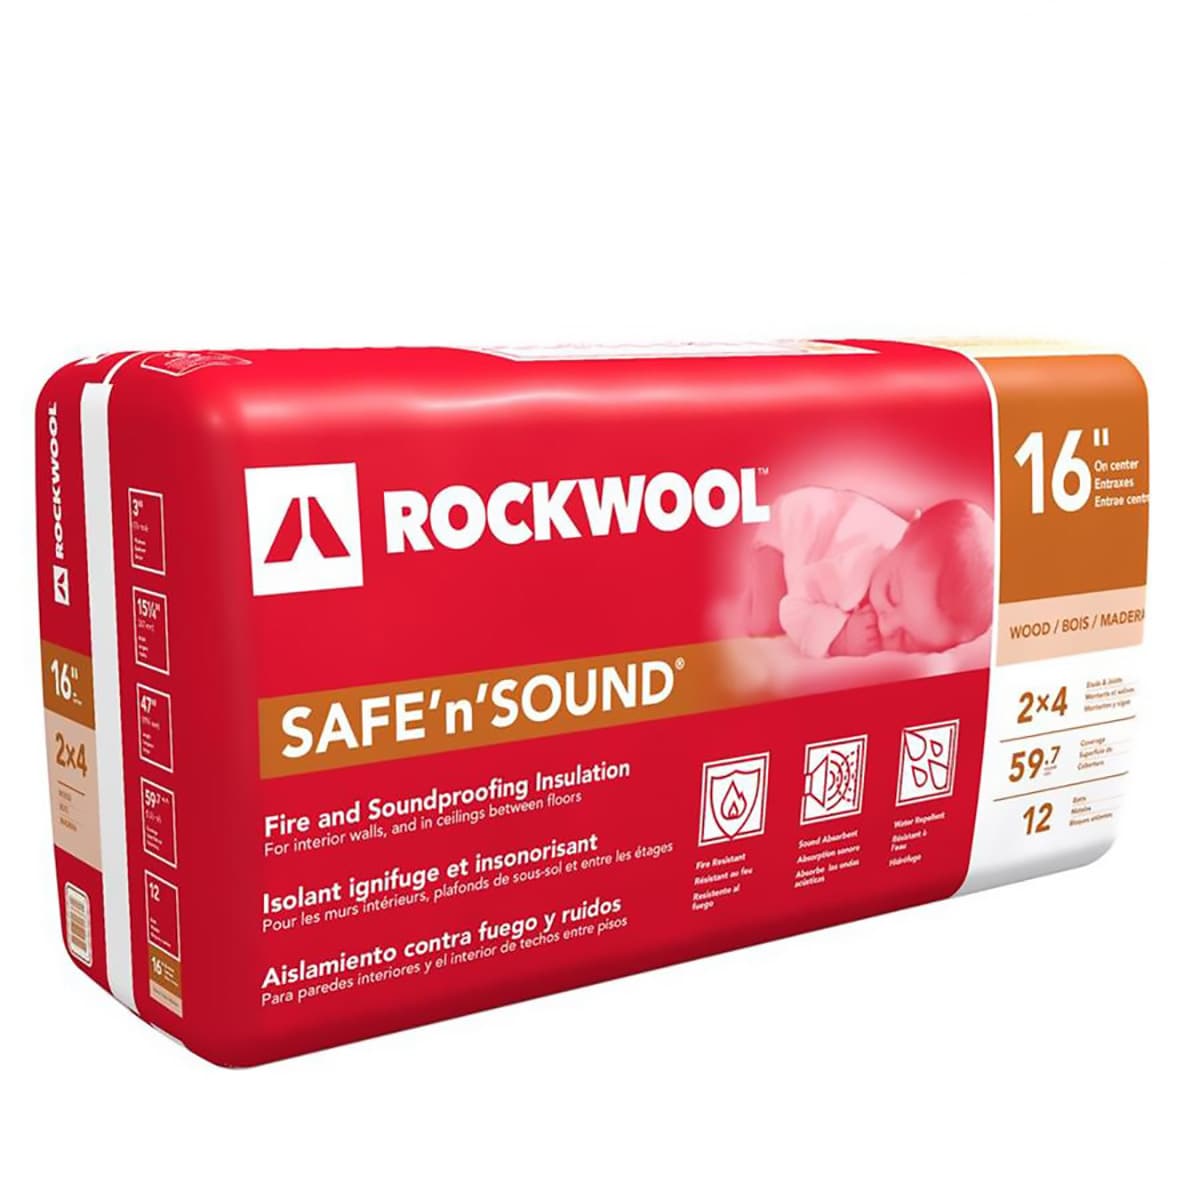 ROCKWOOL 'n' SOUND R- Attic Wall 59.7-sq ft Unfaced Stone Wool Batt Insulation (15.25-in W x L) Individual Pack 1 total in the Insulation department at Lowes.com